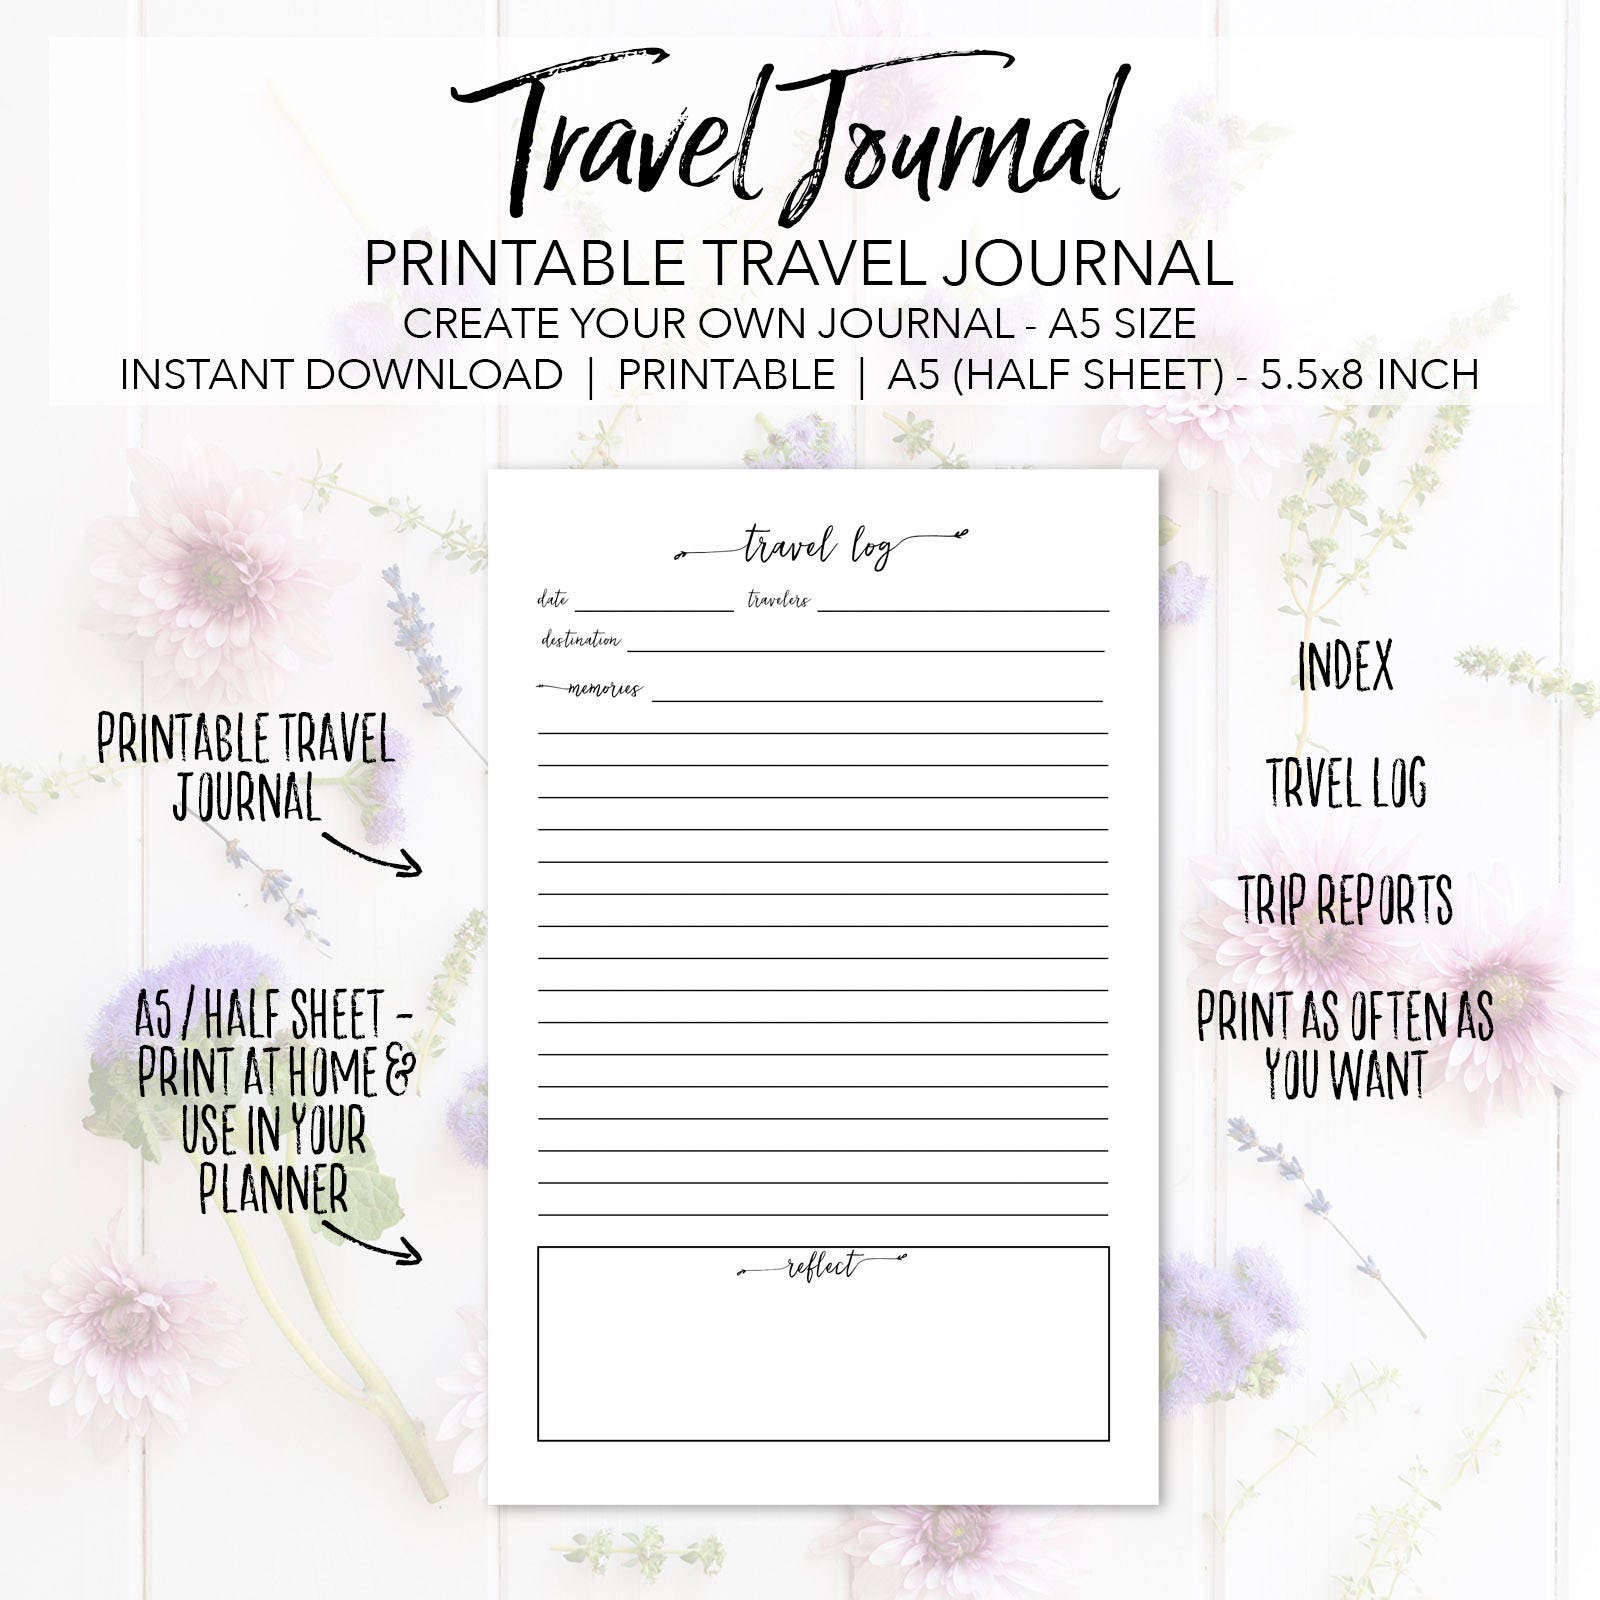 Travel Planner Refill A5